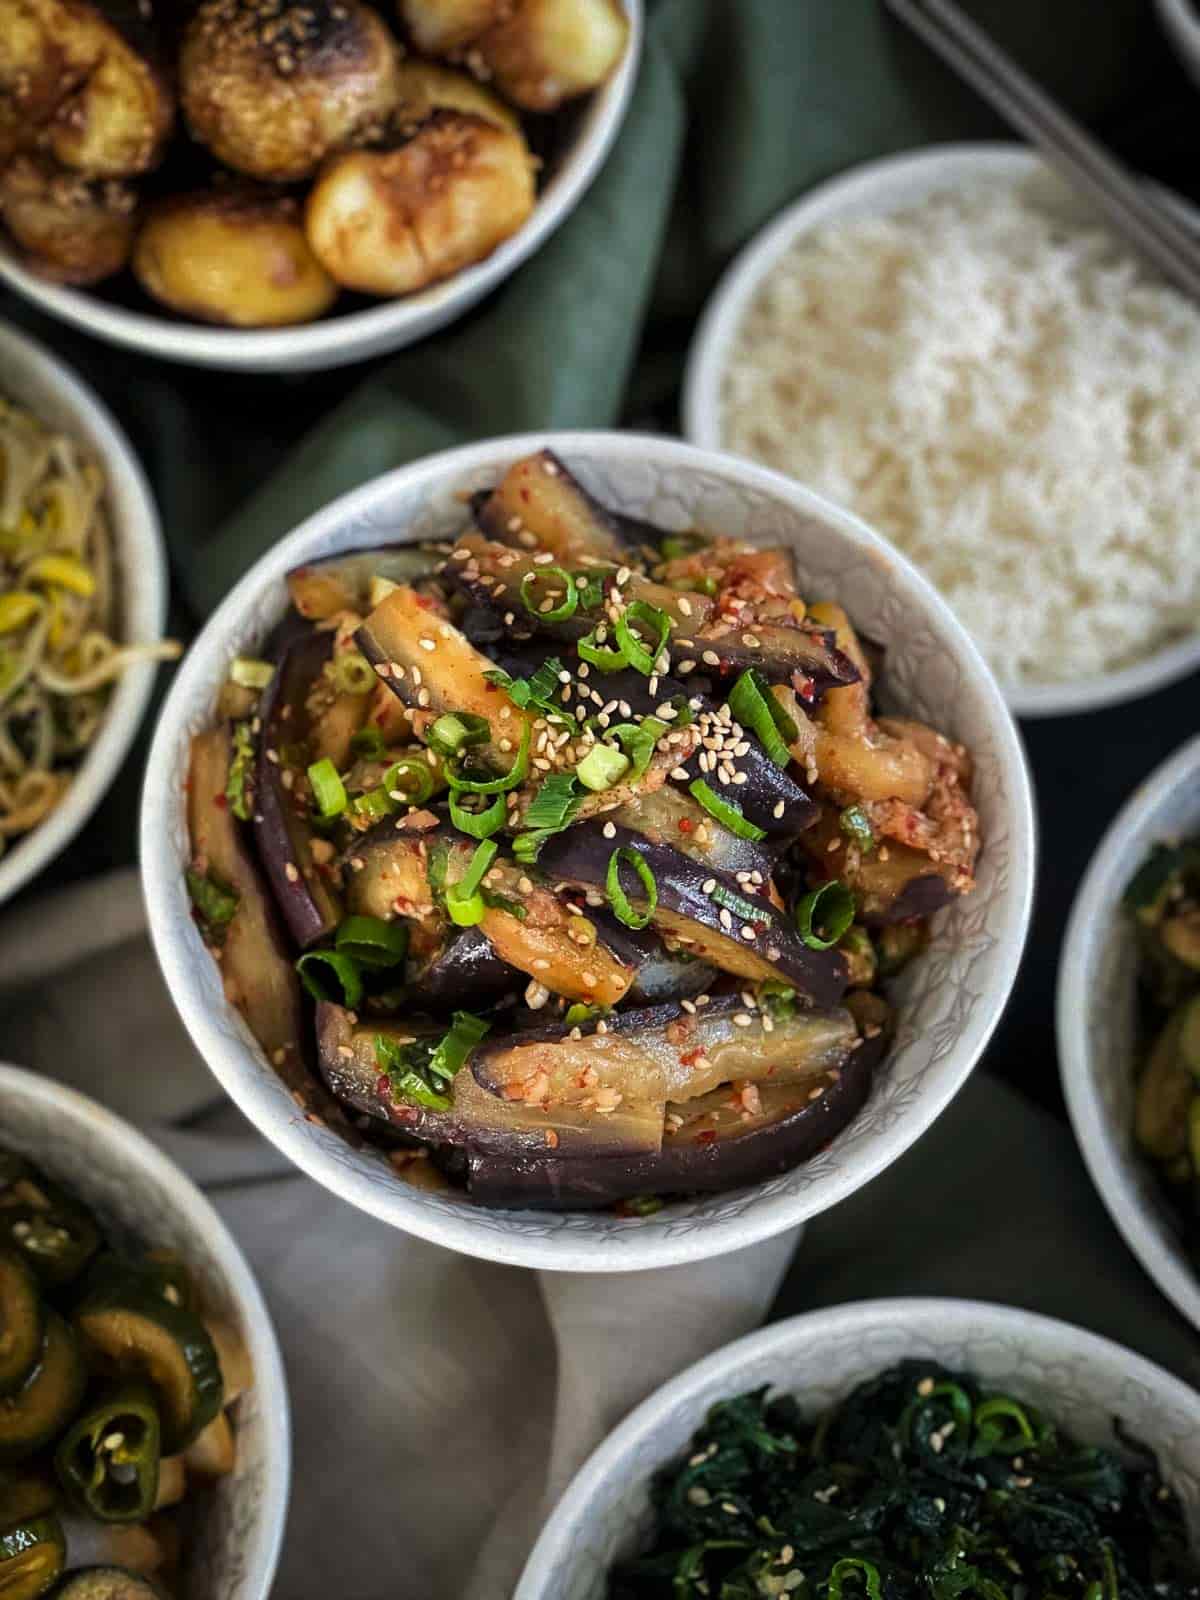 Korean Steamed Eggplant Side Dish - Gaji Namul served with rice and other Korean banchan